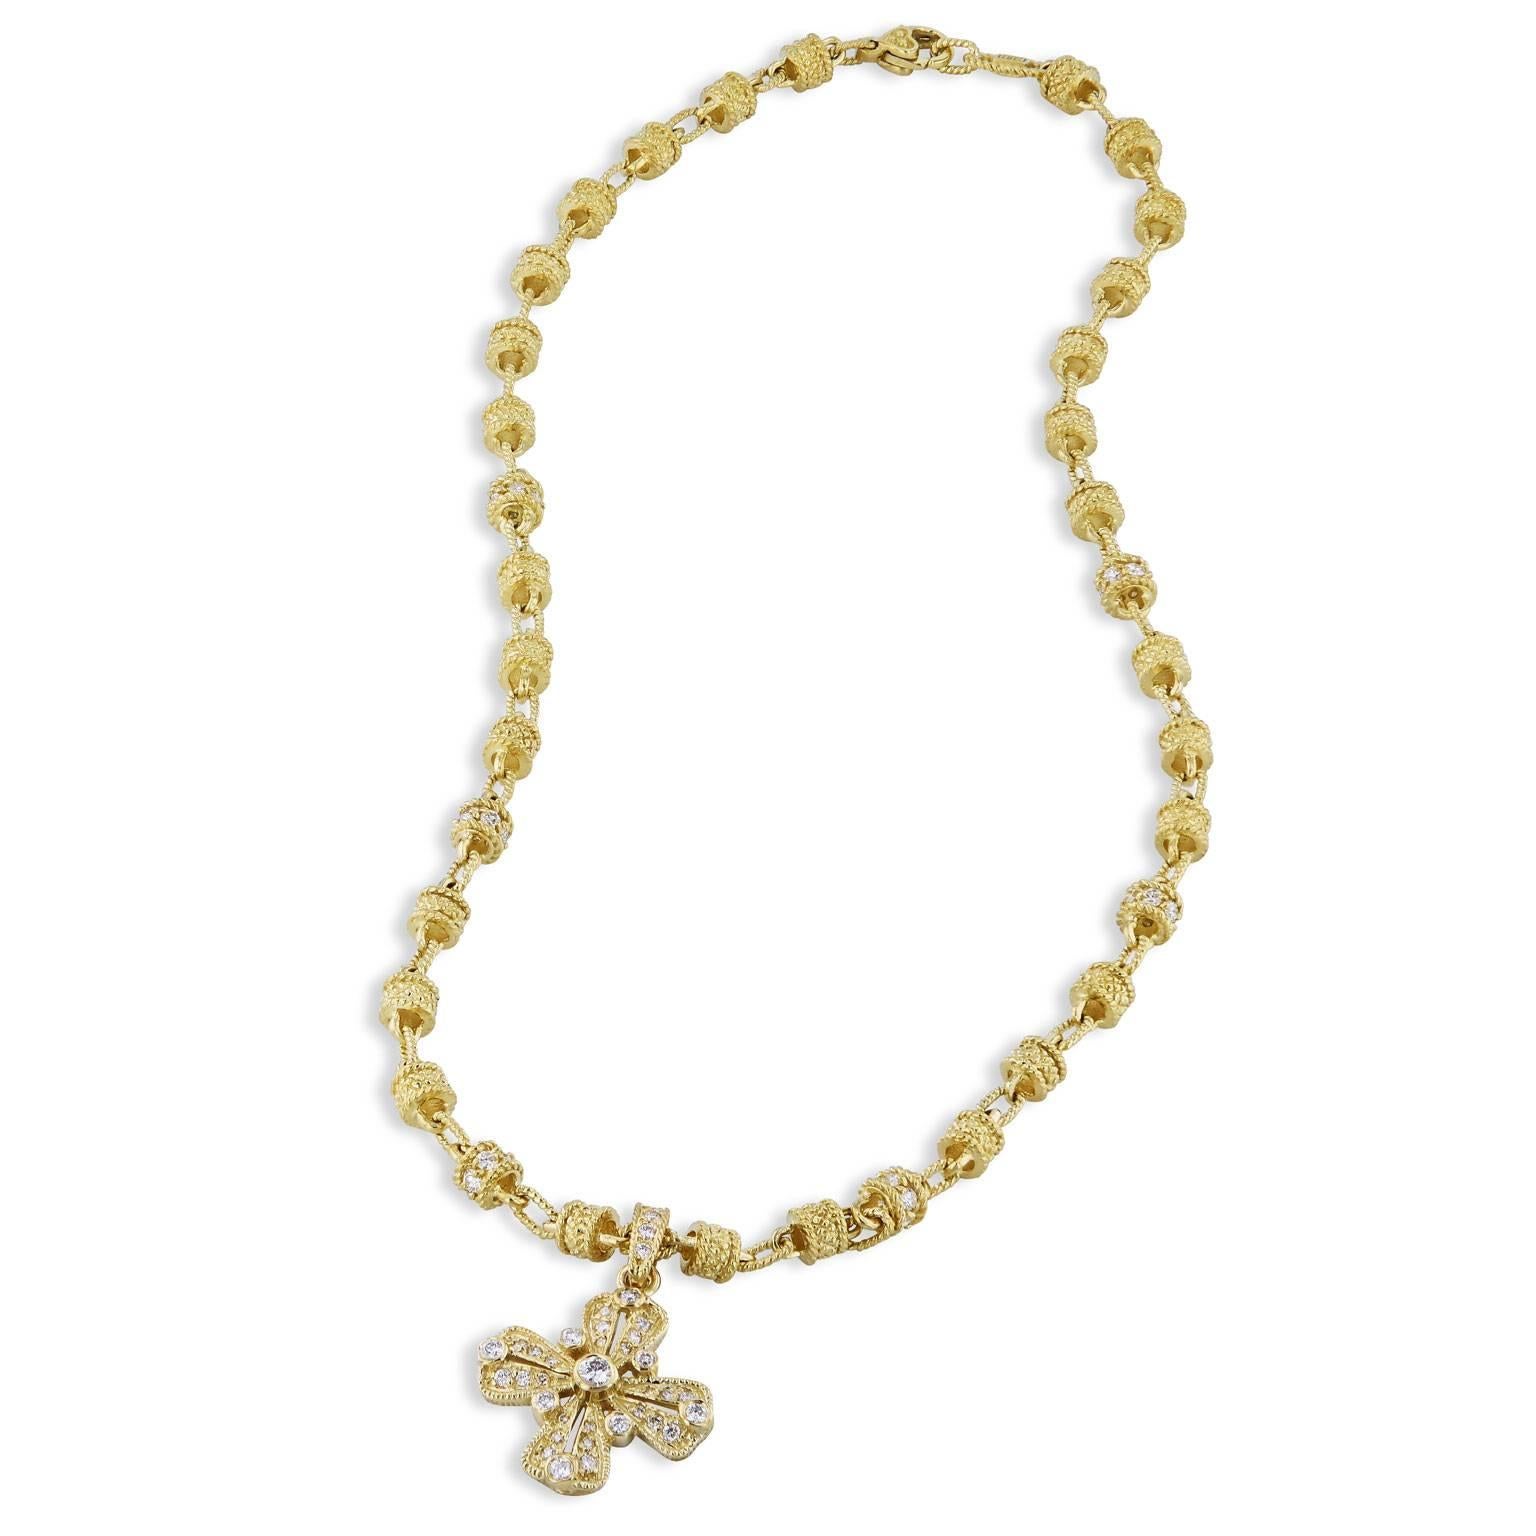 Enjoy this previously loved 18 karat yellow gold, 17 inch Judith Ripka necklace with removable Gothic Maltese diamond cross featuring sixty-nine diamonds (G/H/SI1).